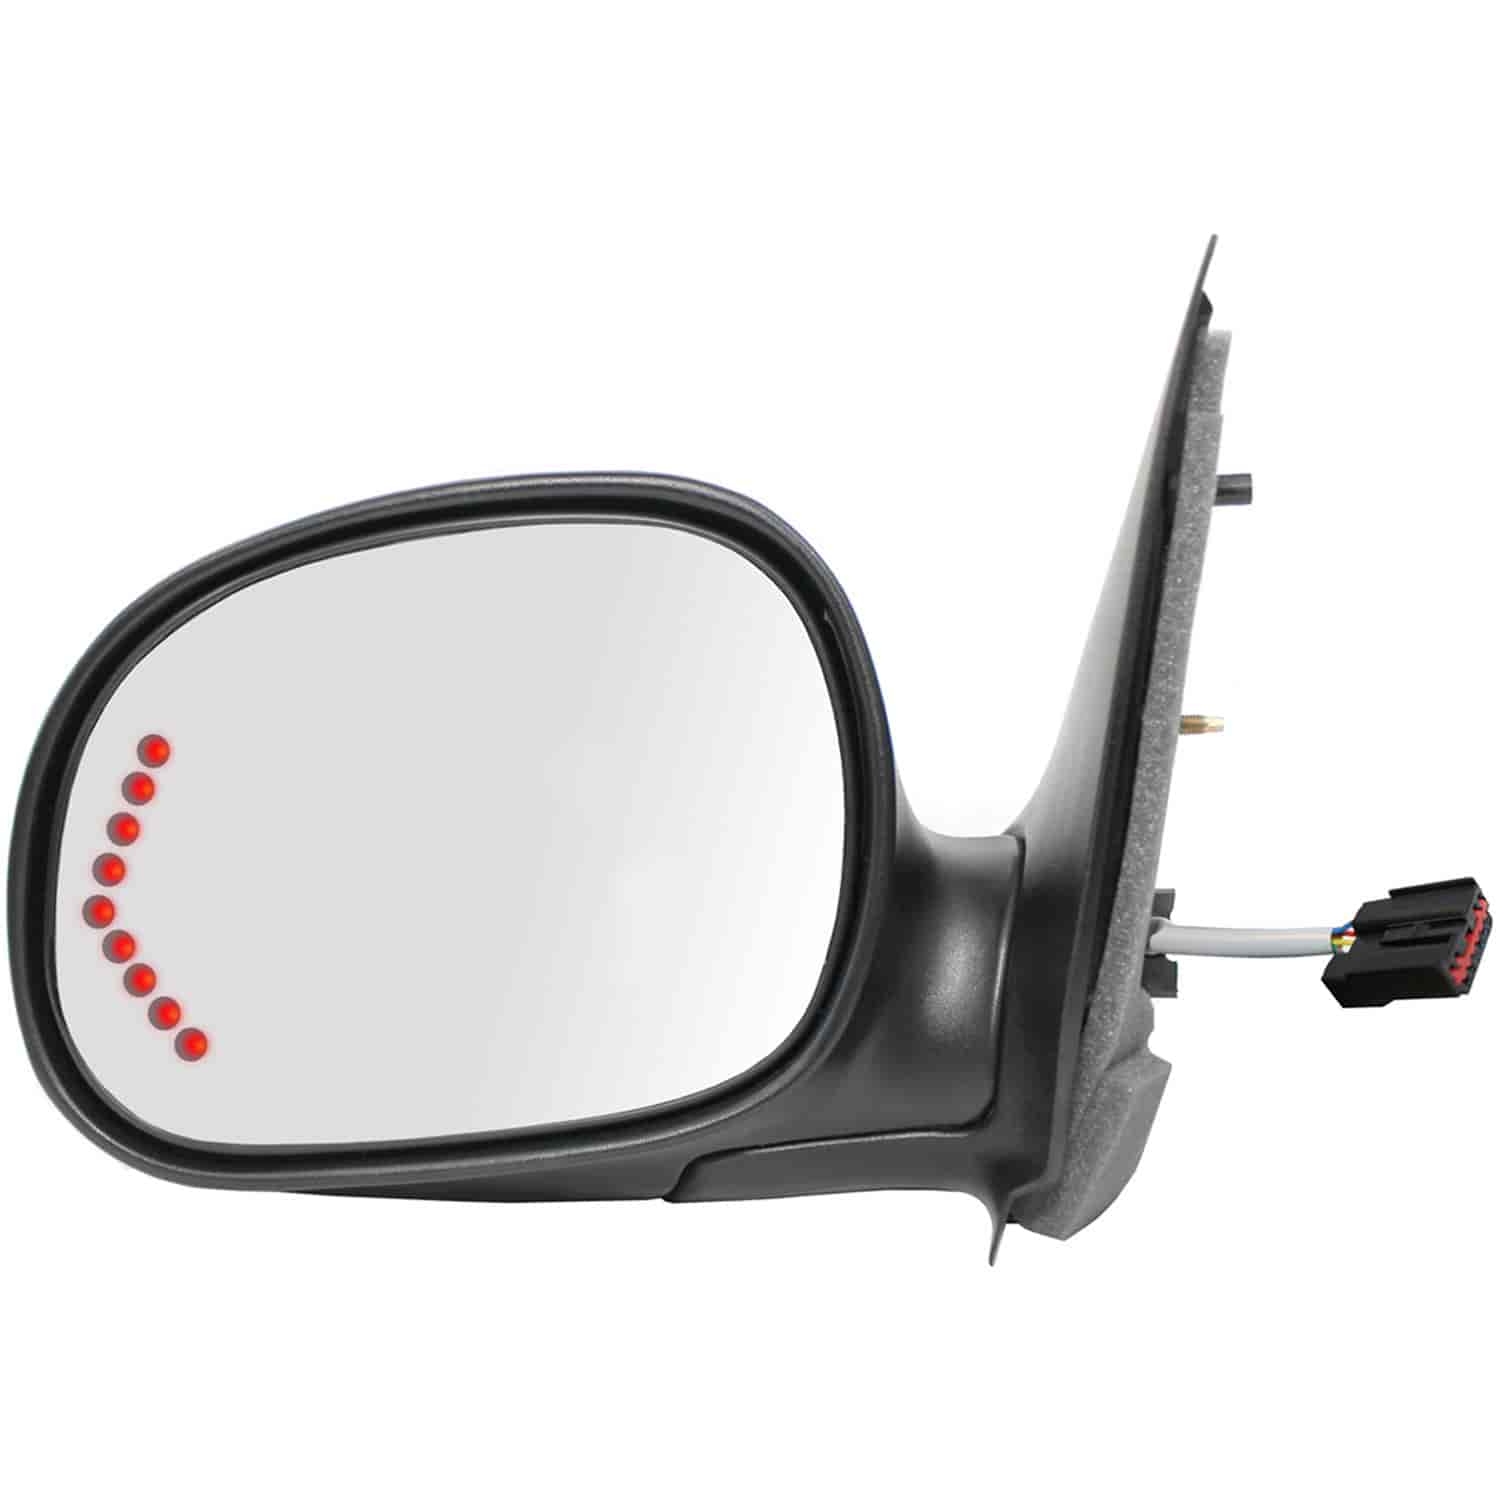 OEM Style Replacement mirror for 98-03 Ford F150 Pick-Up F250 LD Pick-Up w/LED arrow turn signal dri